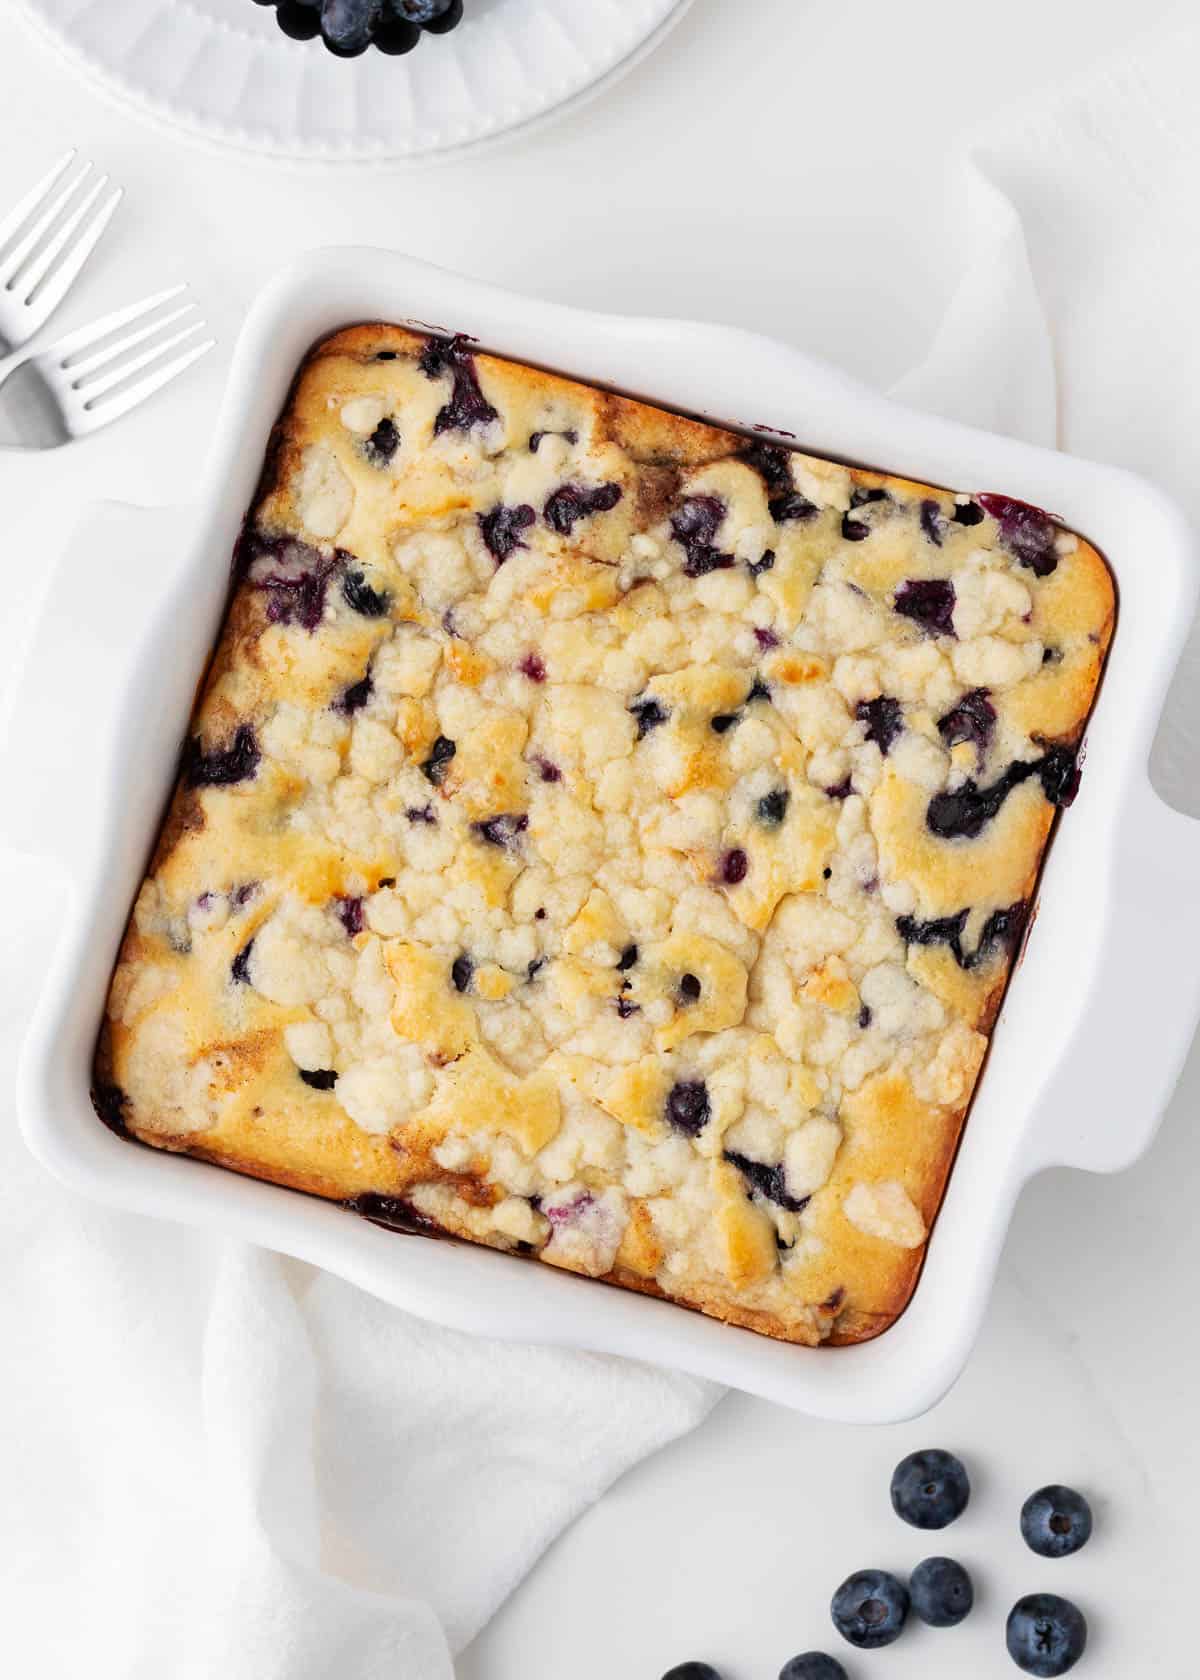 Blueberry coffee cake in a white baking dish.